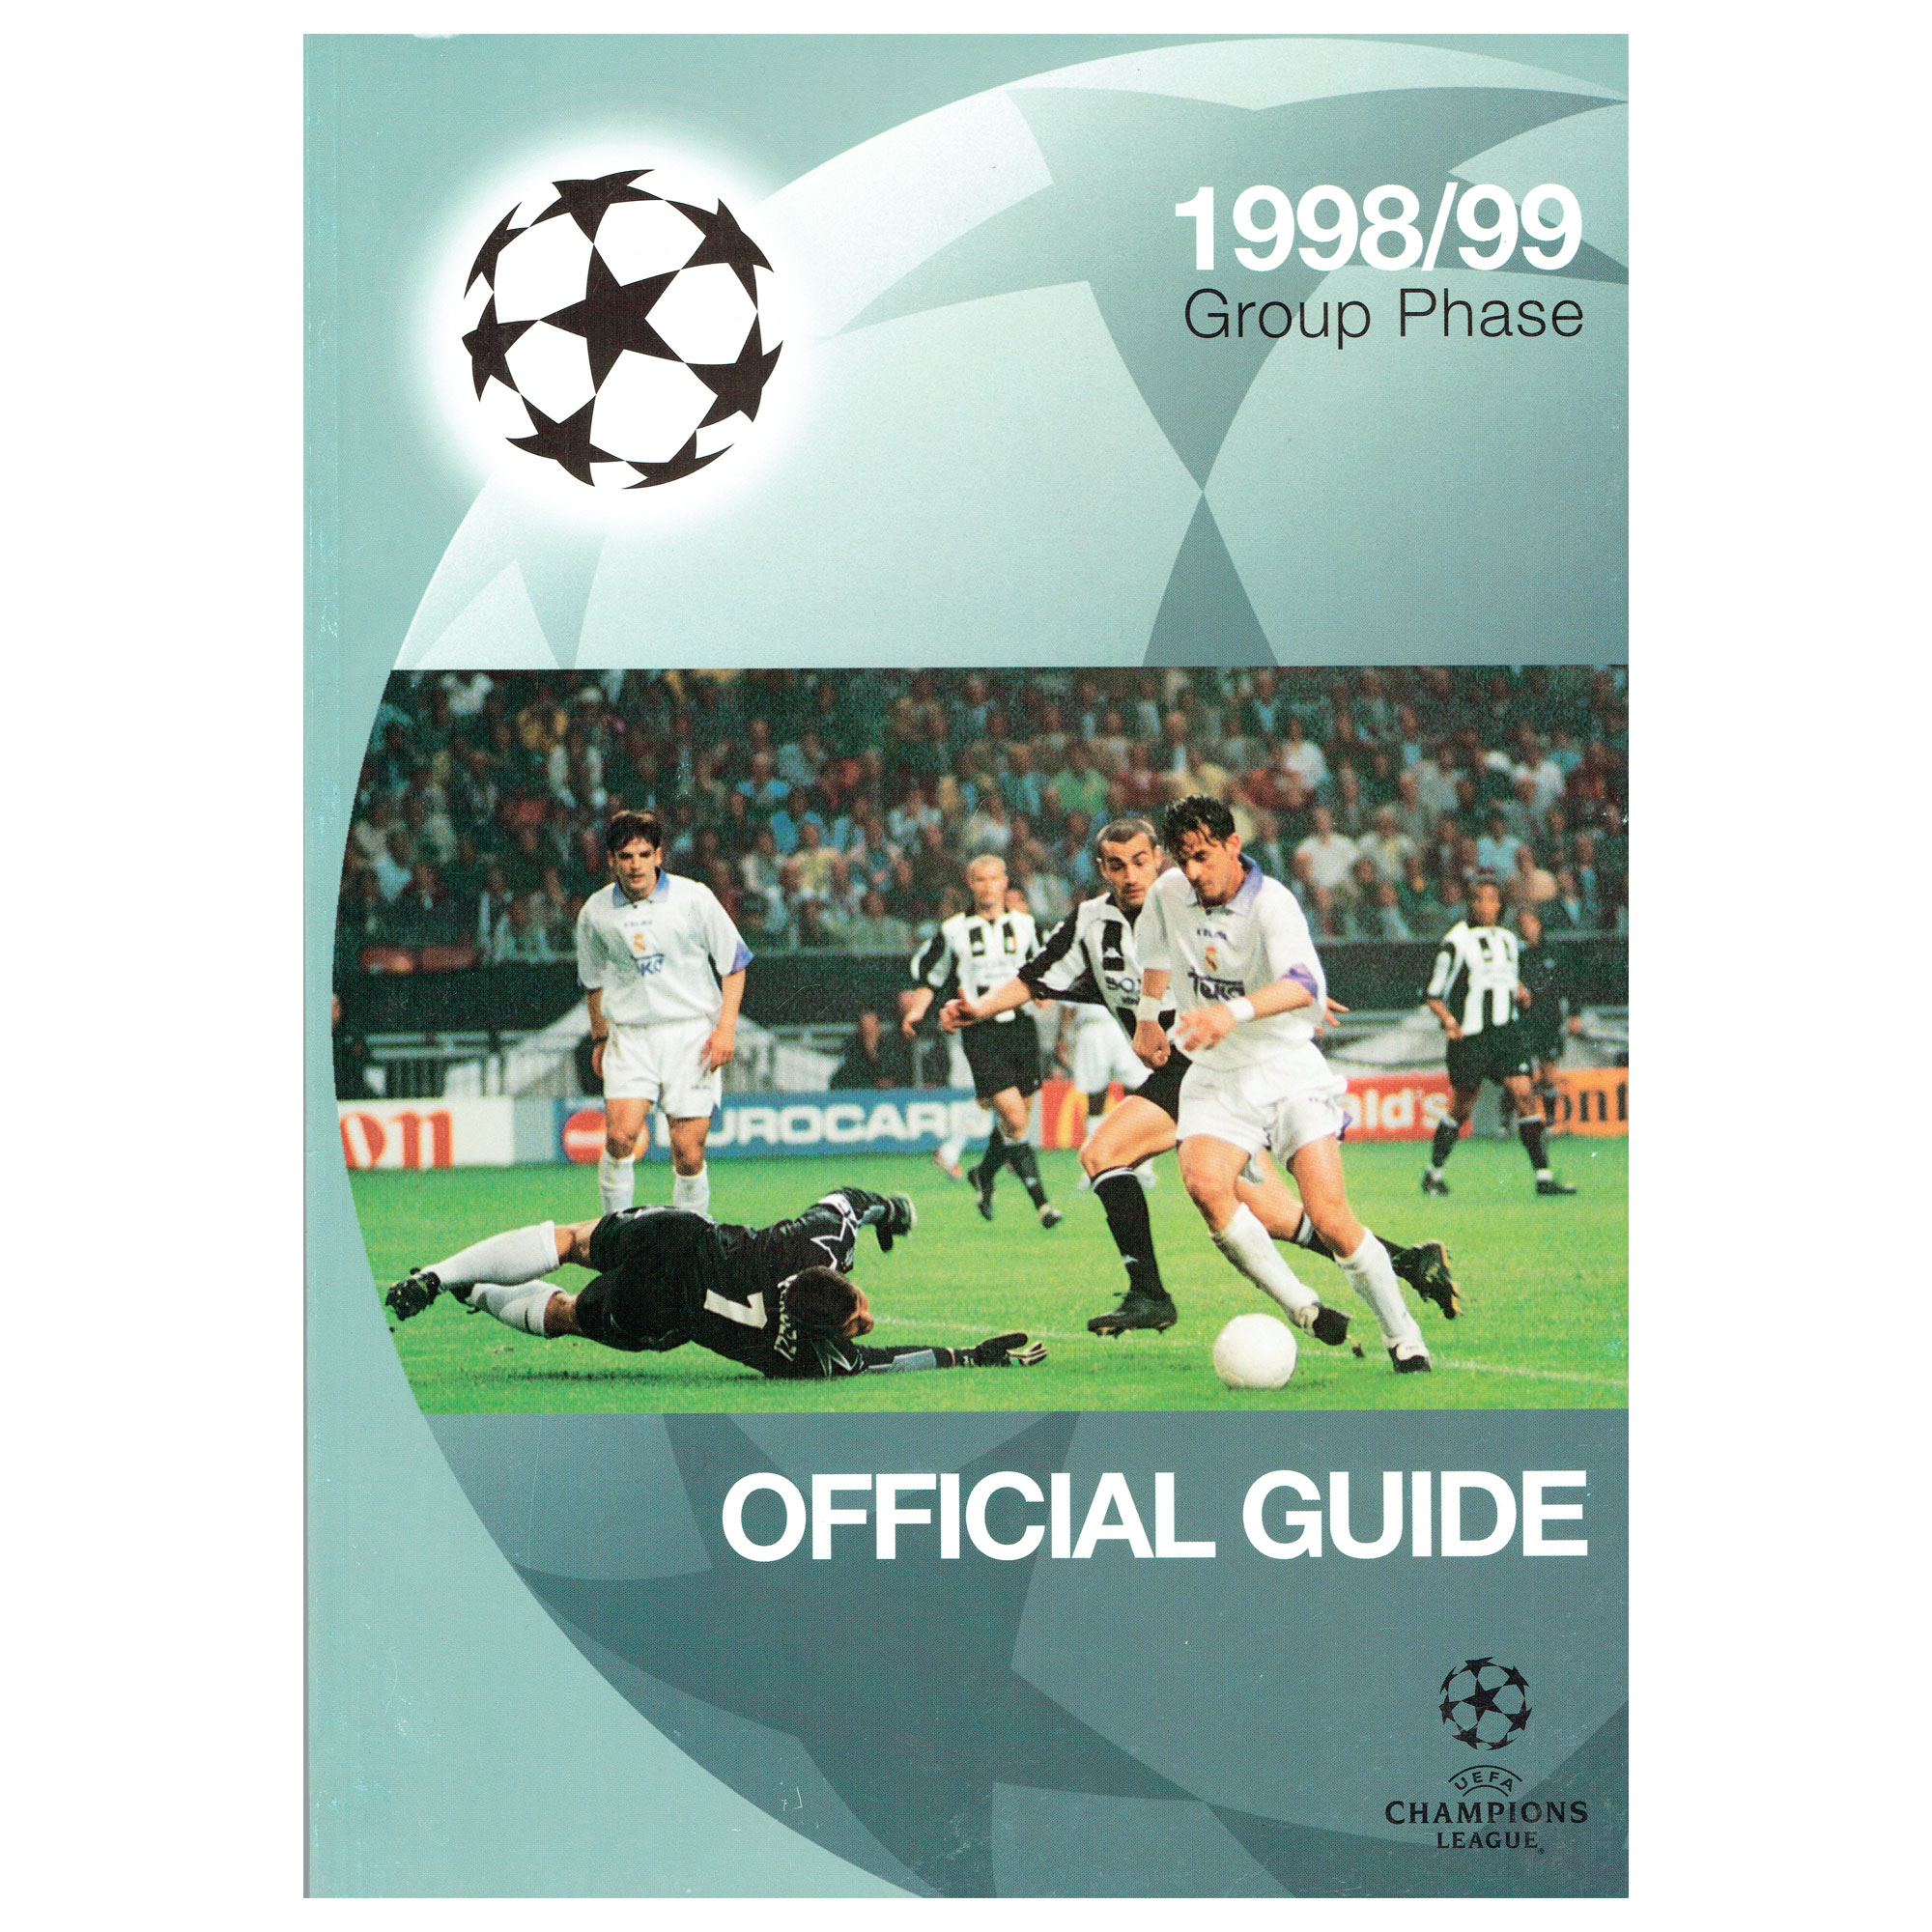 1998 Champions League Official Guide Book for Group Phase